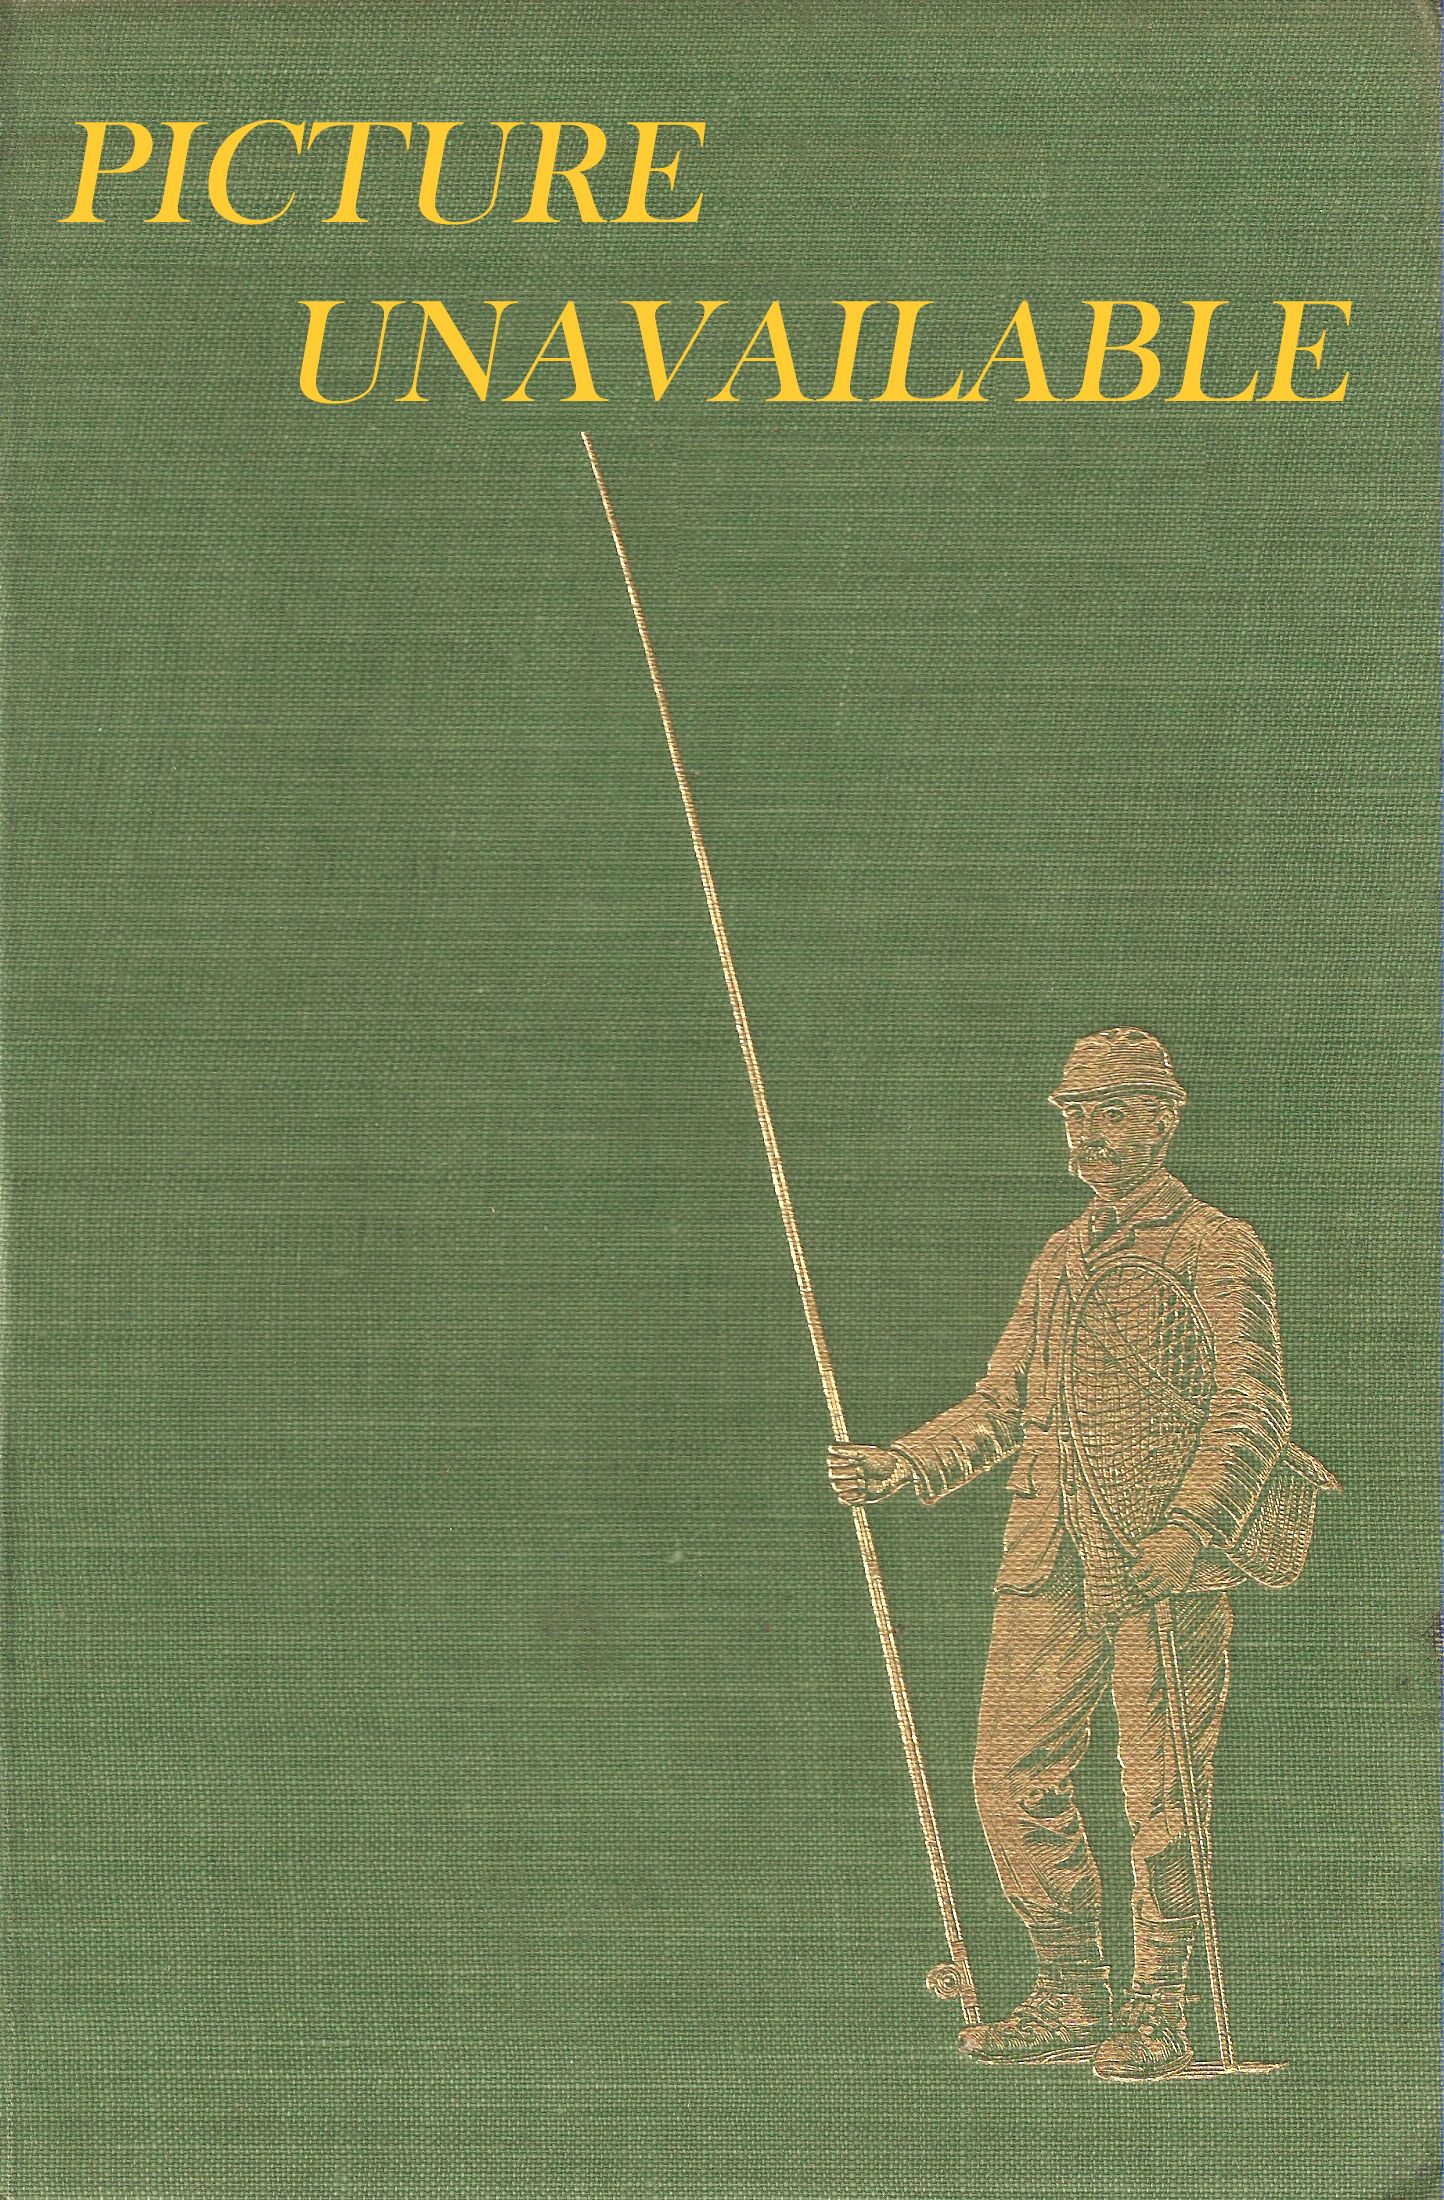 FLY FISHING BY J.R. HARTLEY: MEMORIES OF ANGLING DAYS.